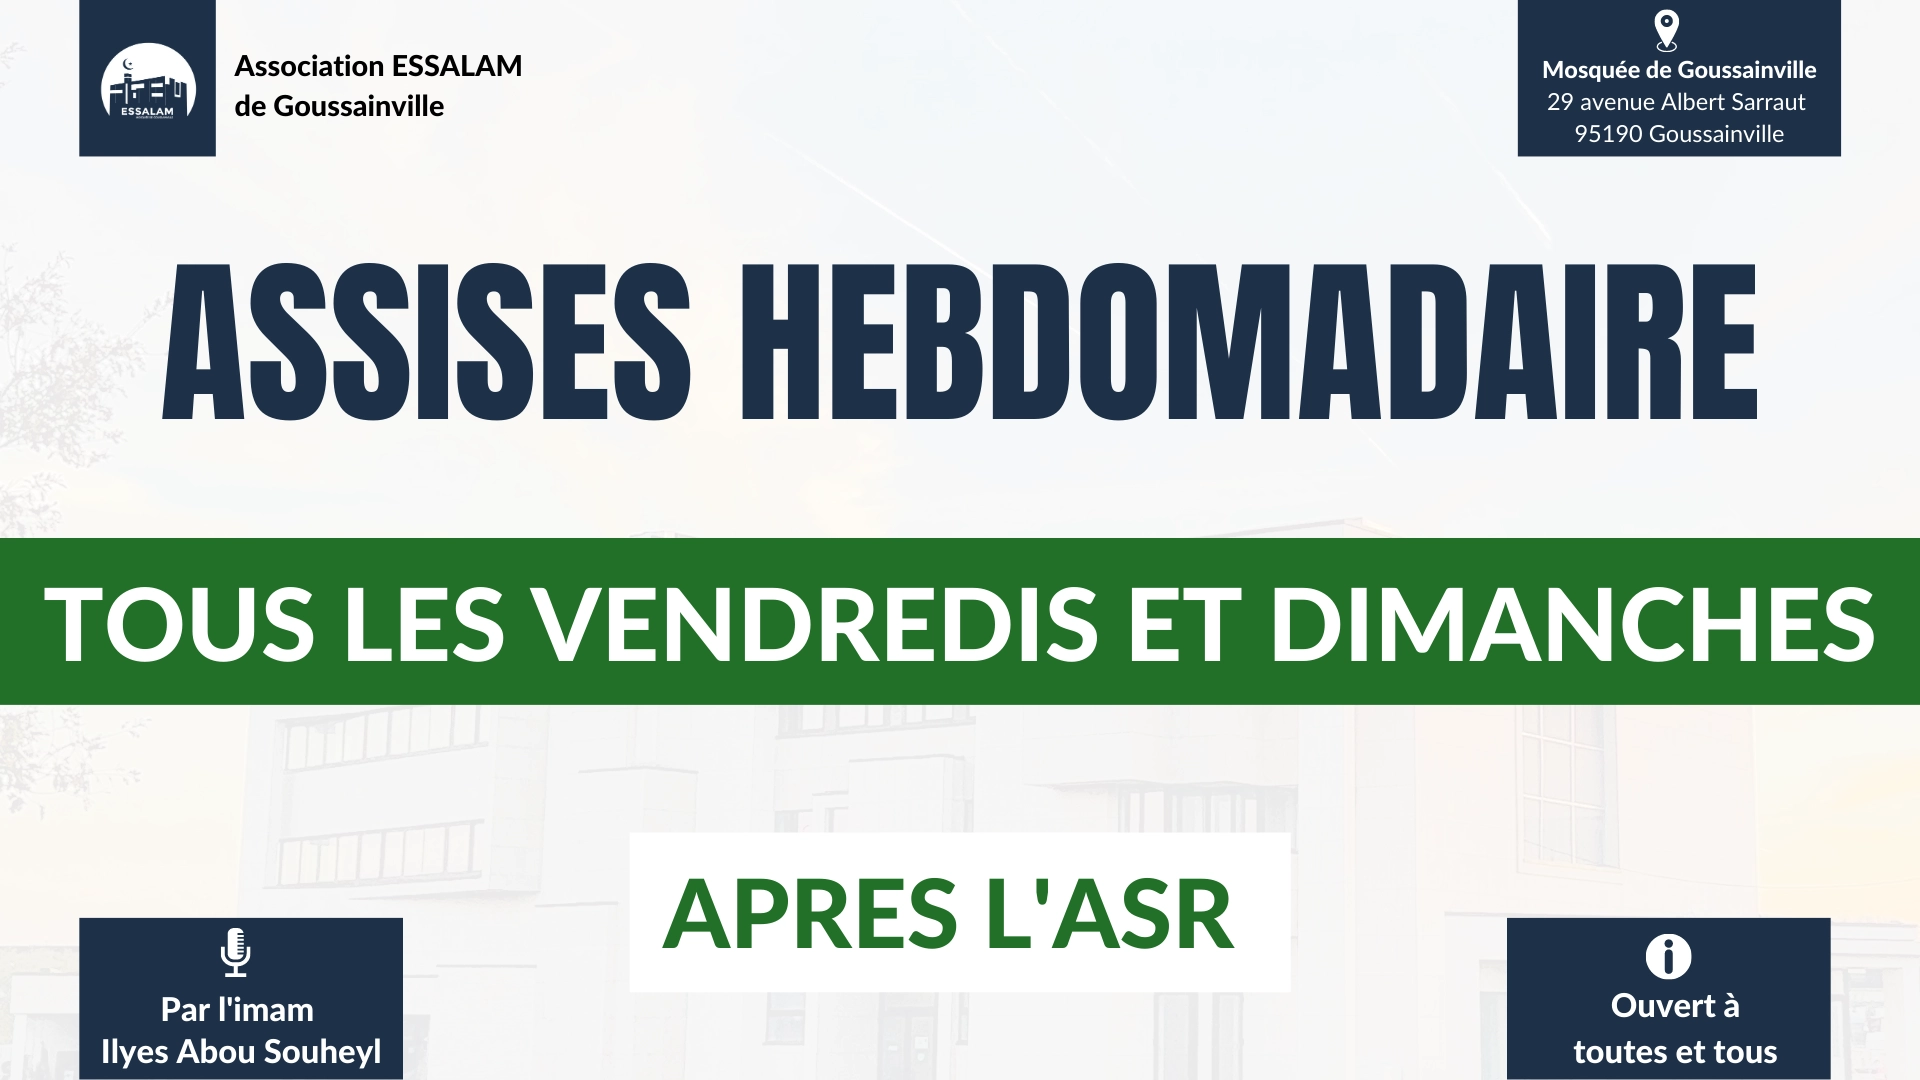 Assises Hebdomadaire